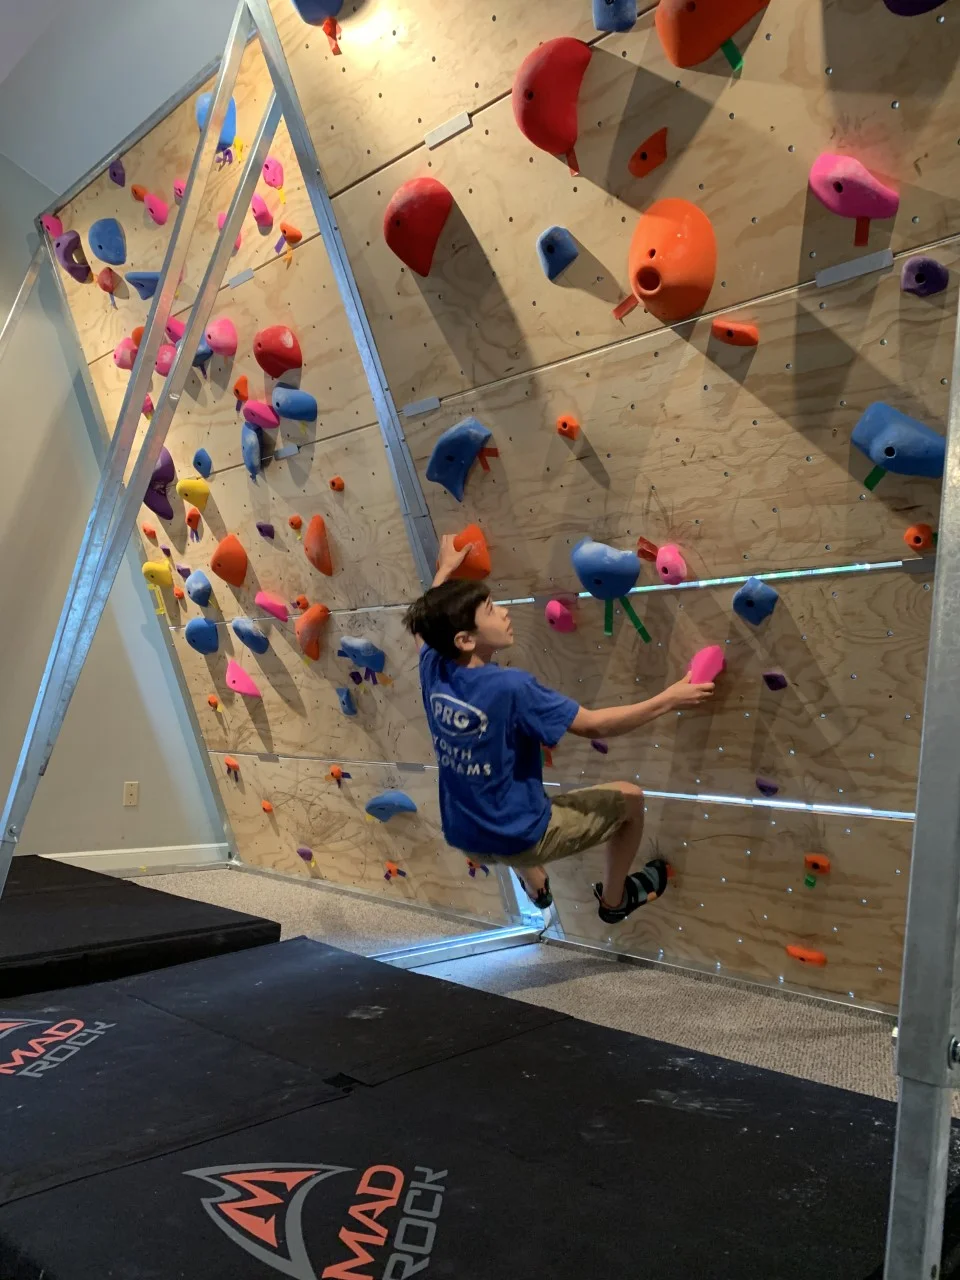 Home with Treadwall climbing wall, home fitness climbing wall, Training for climbing